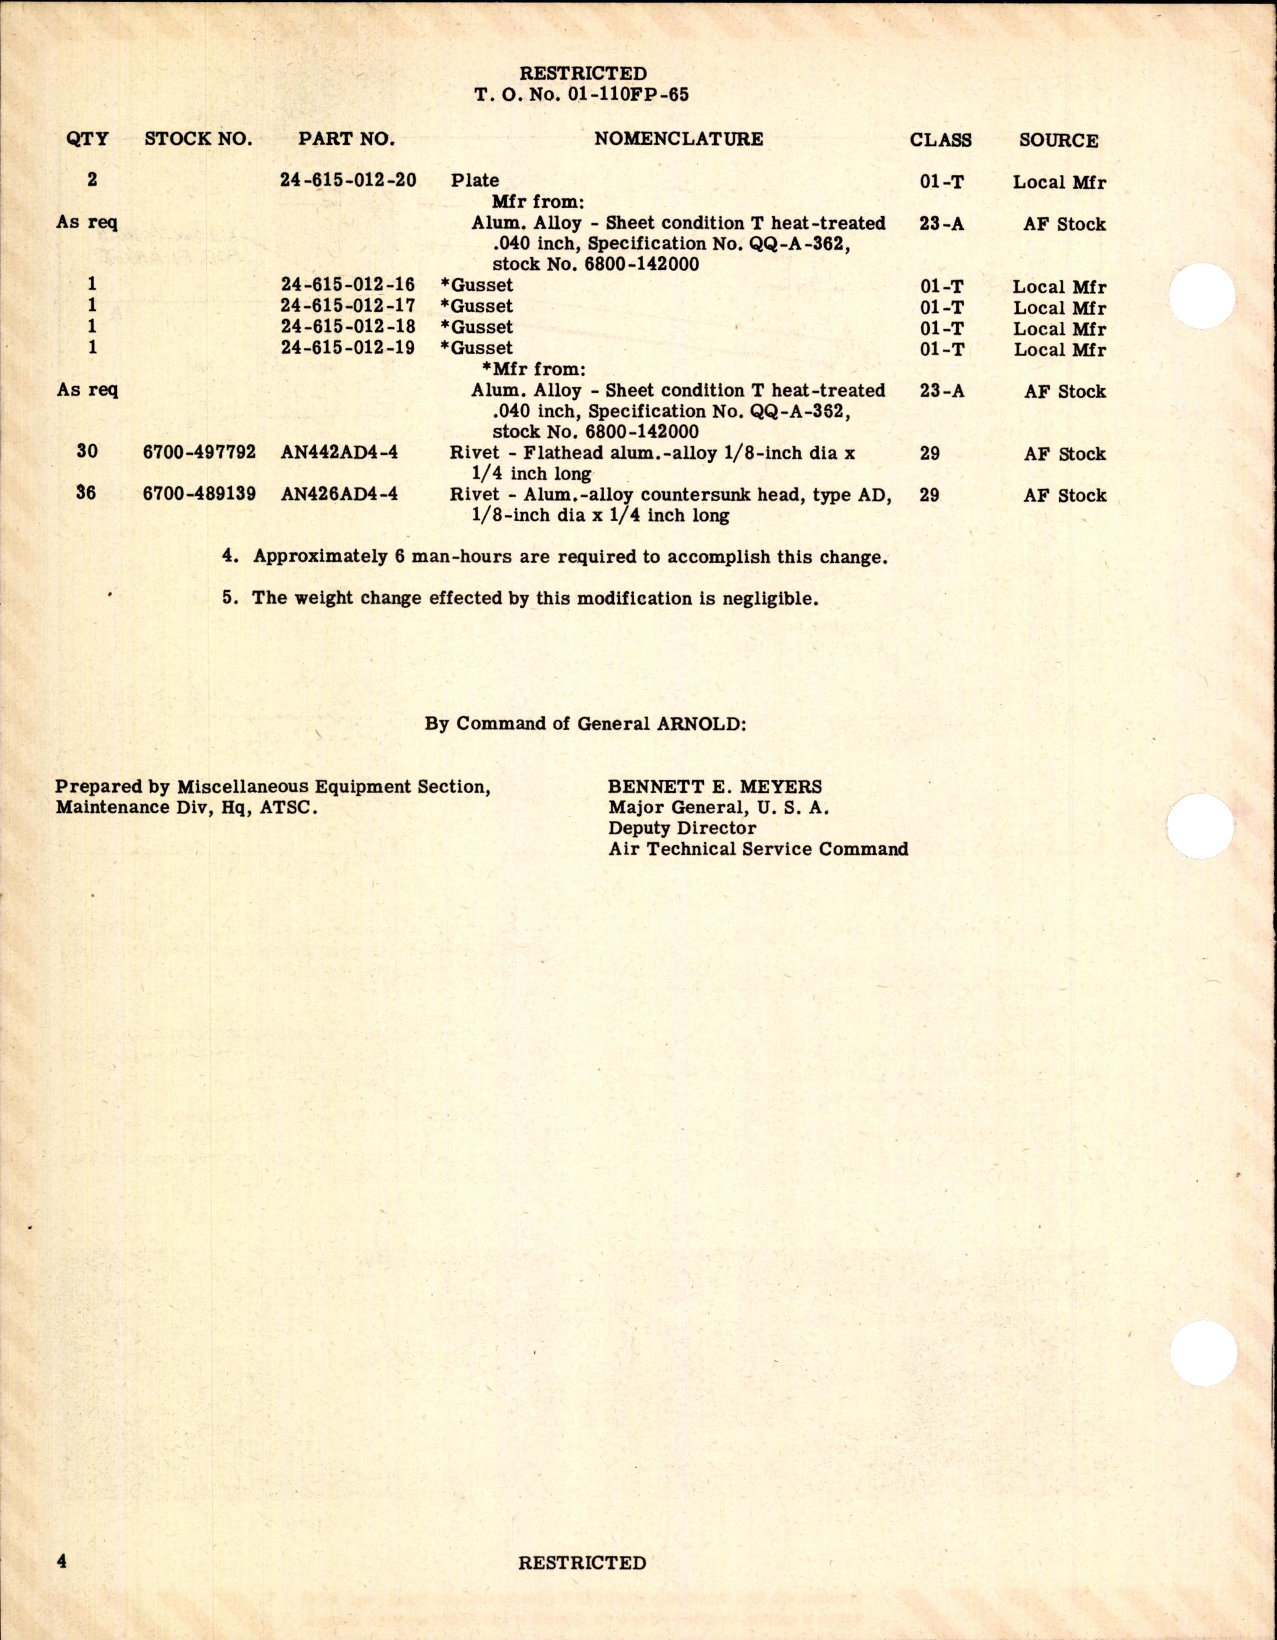 Sample page 4 from AirCorps Library document: Installation of Reinforcing Gussets & Plates on Carburetor